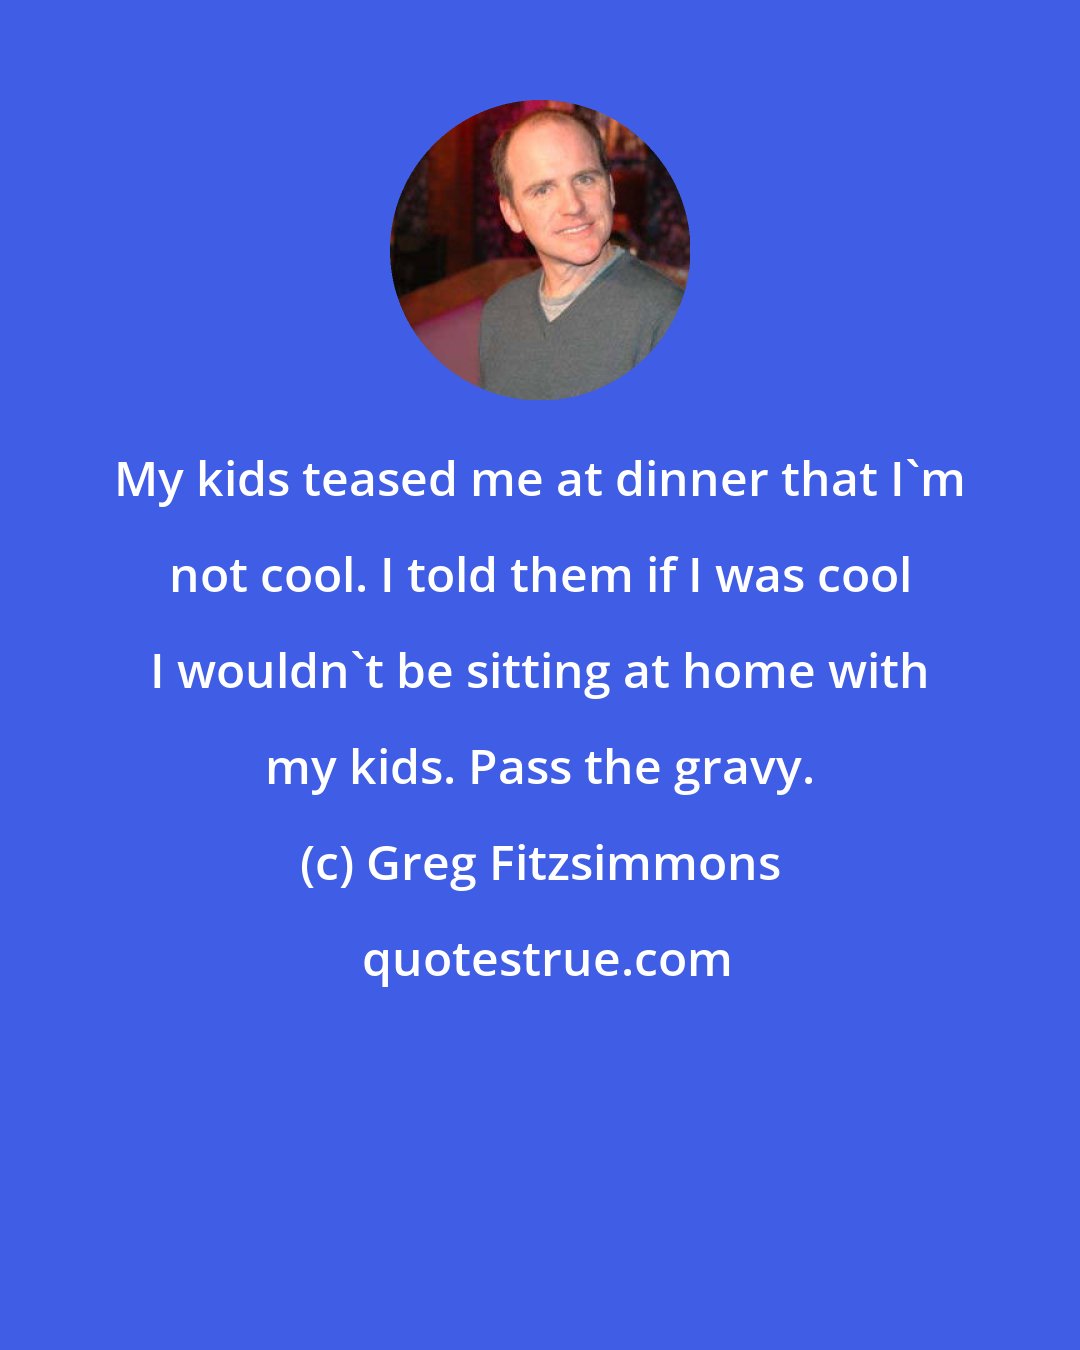 Greg Fitzsimmons: My kids teased me at dinner that I'm not cool. I told them if I was cool I wouldn't be sitting at home with my kids. Pass the gravy.